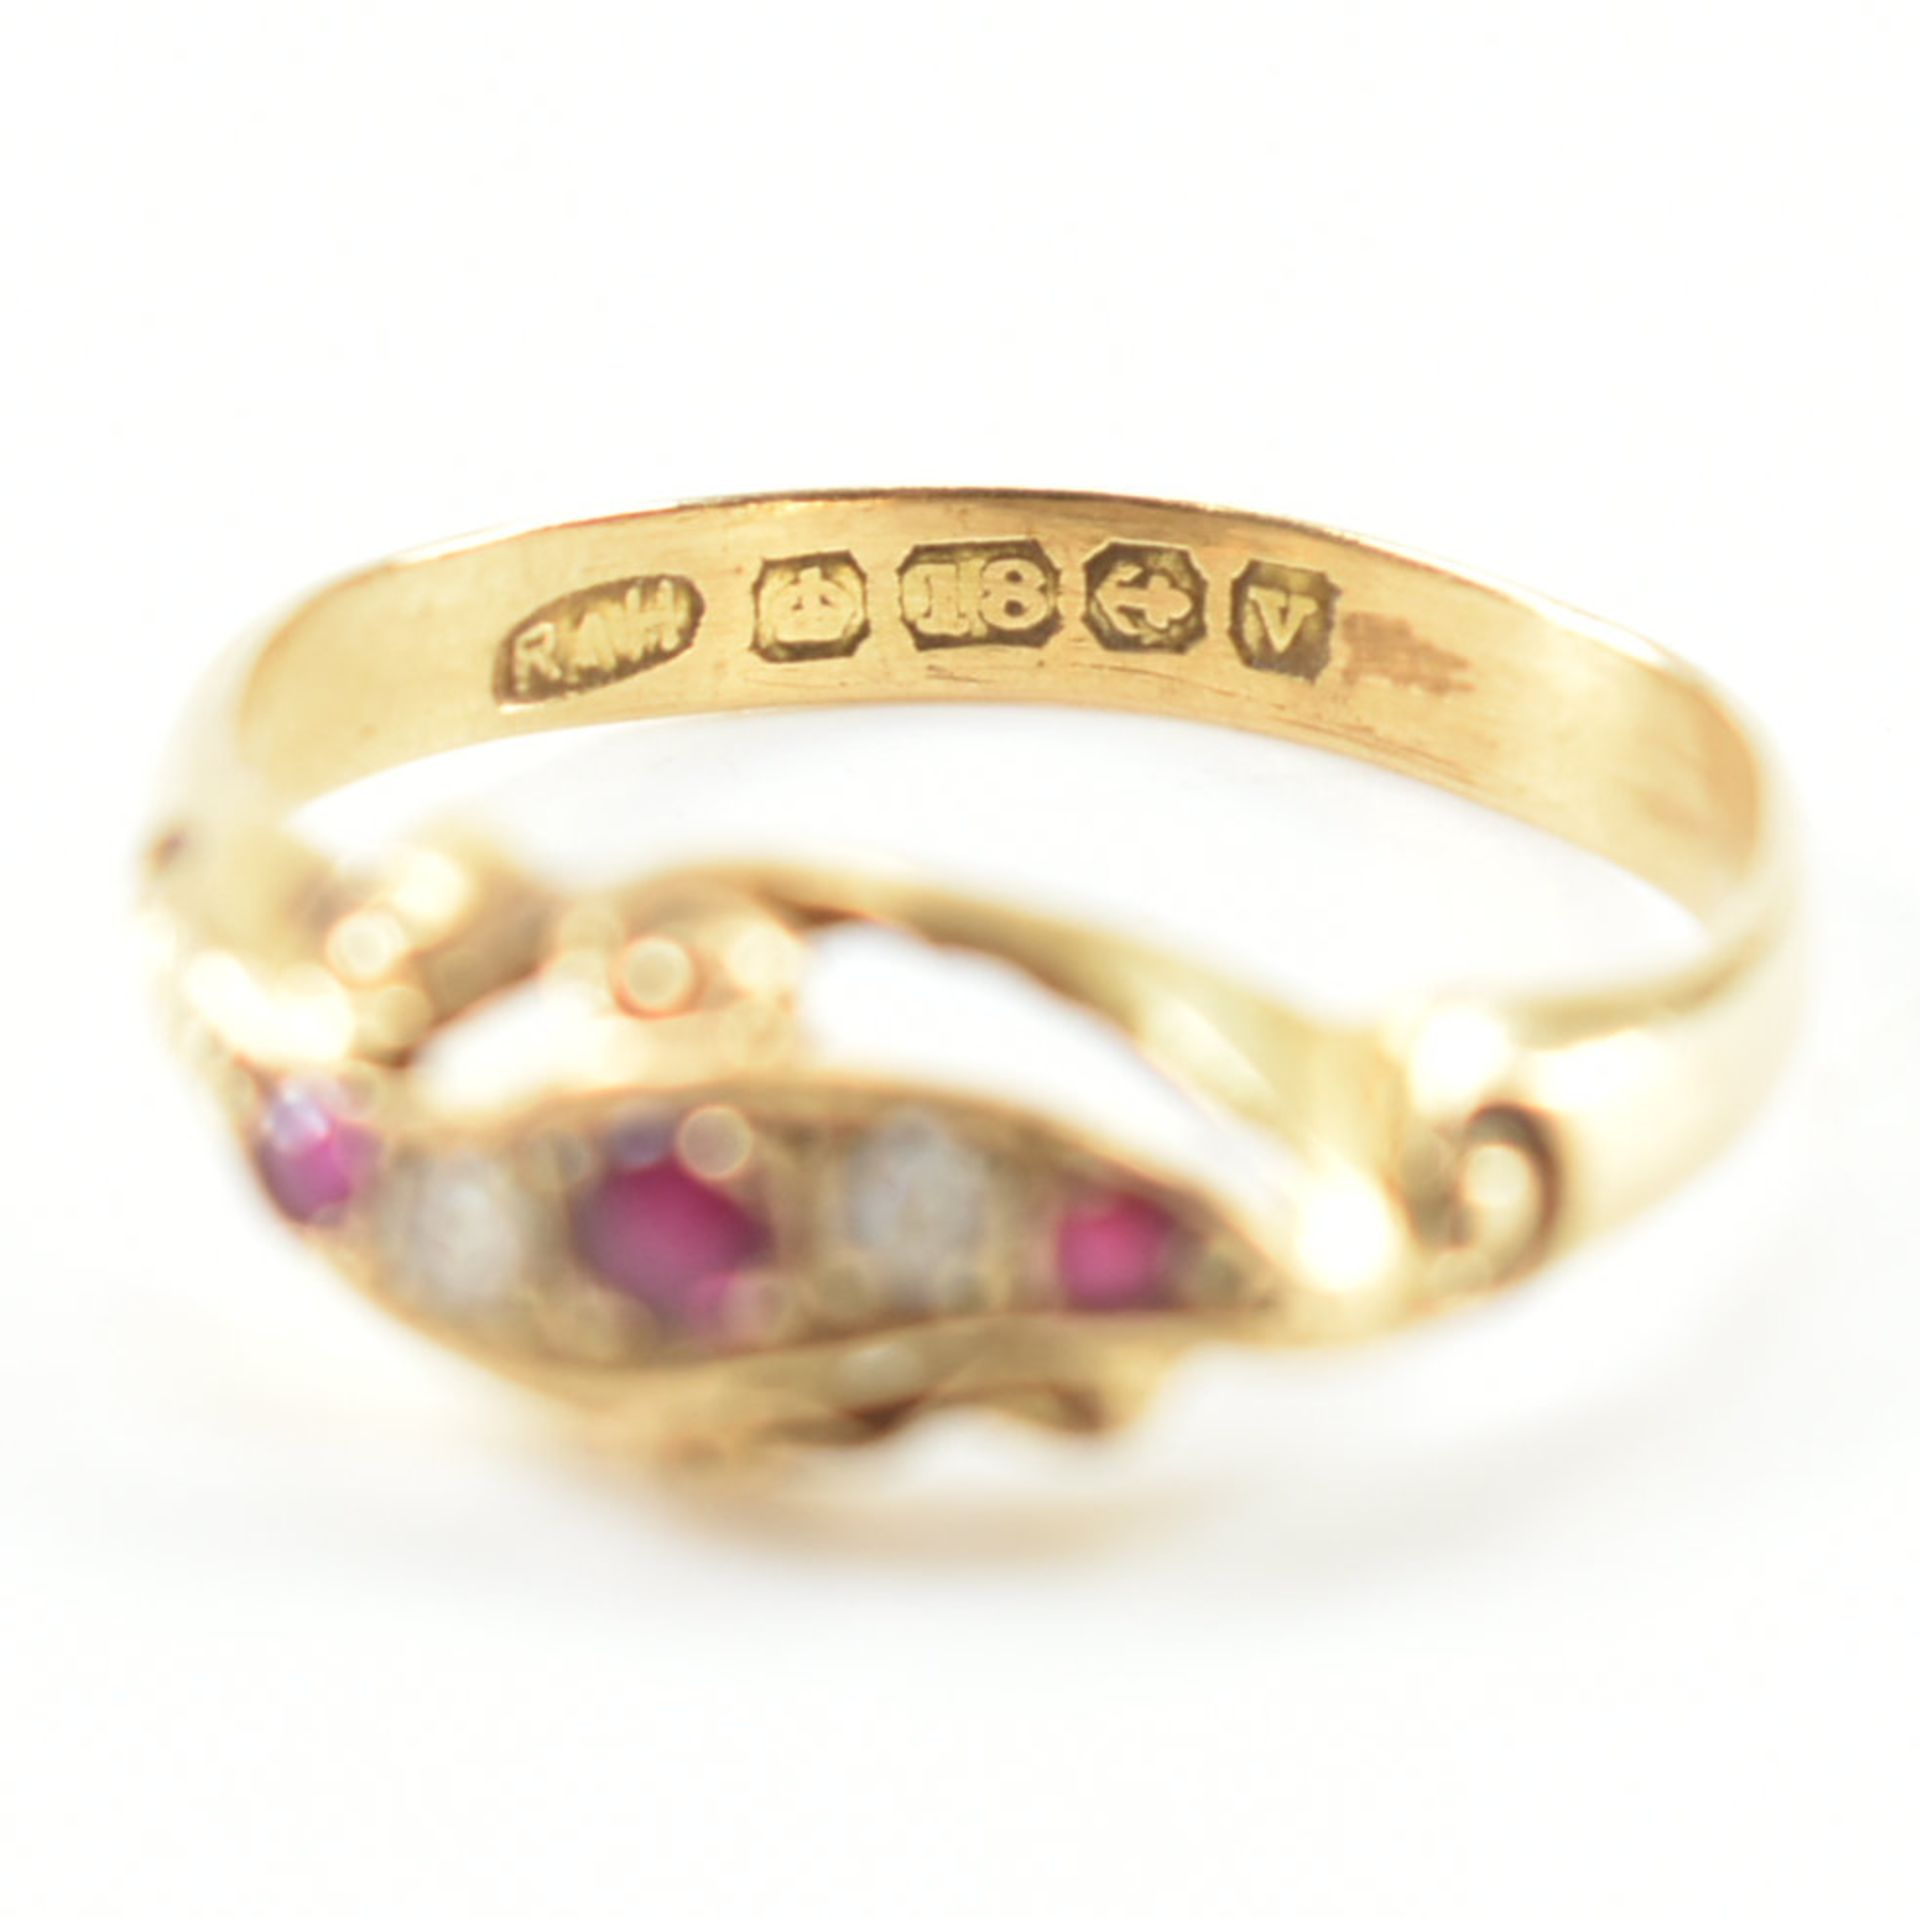 HALLMARKED 18CT GOLD SPINEL & DIAMOND RING - Image 7 of 8